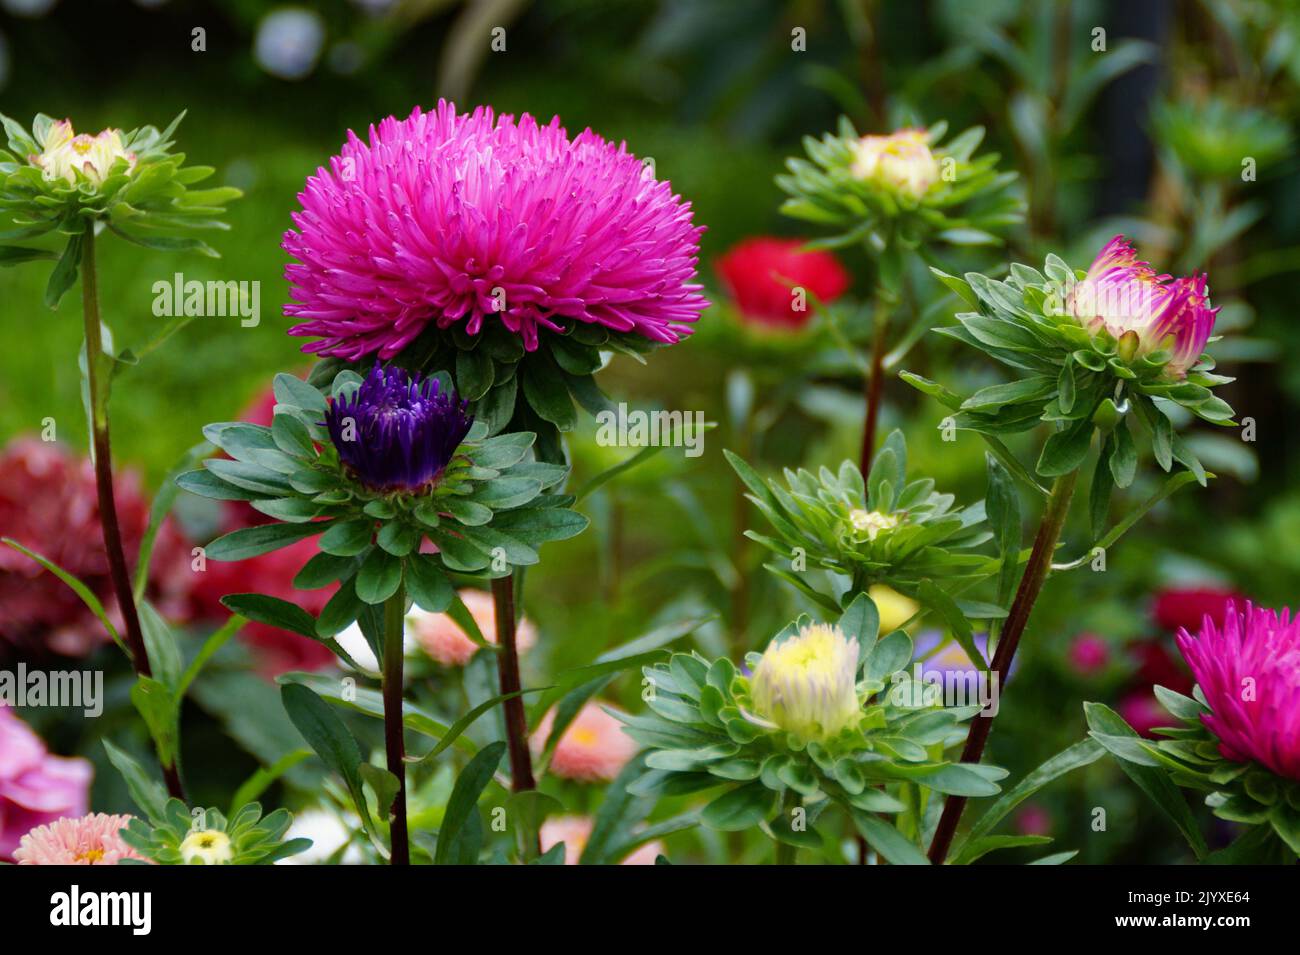 a gorgeous large bright pink aster called Callistephus Chinensis in the summer garden with other beautiful brightly coloured flowers, Ulm, Germany Stock Photo